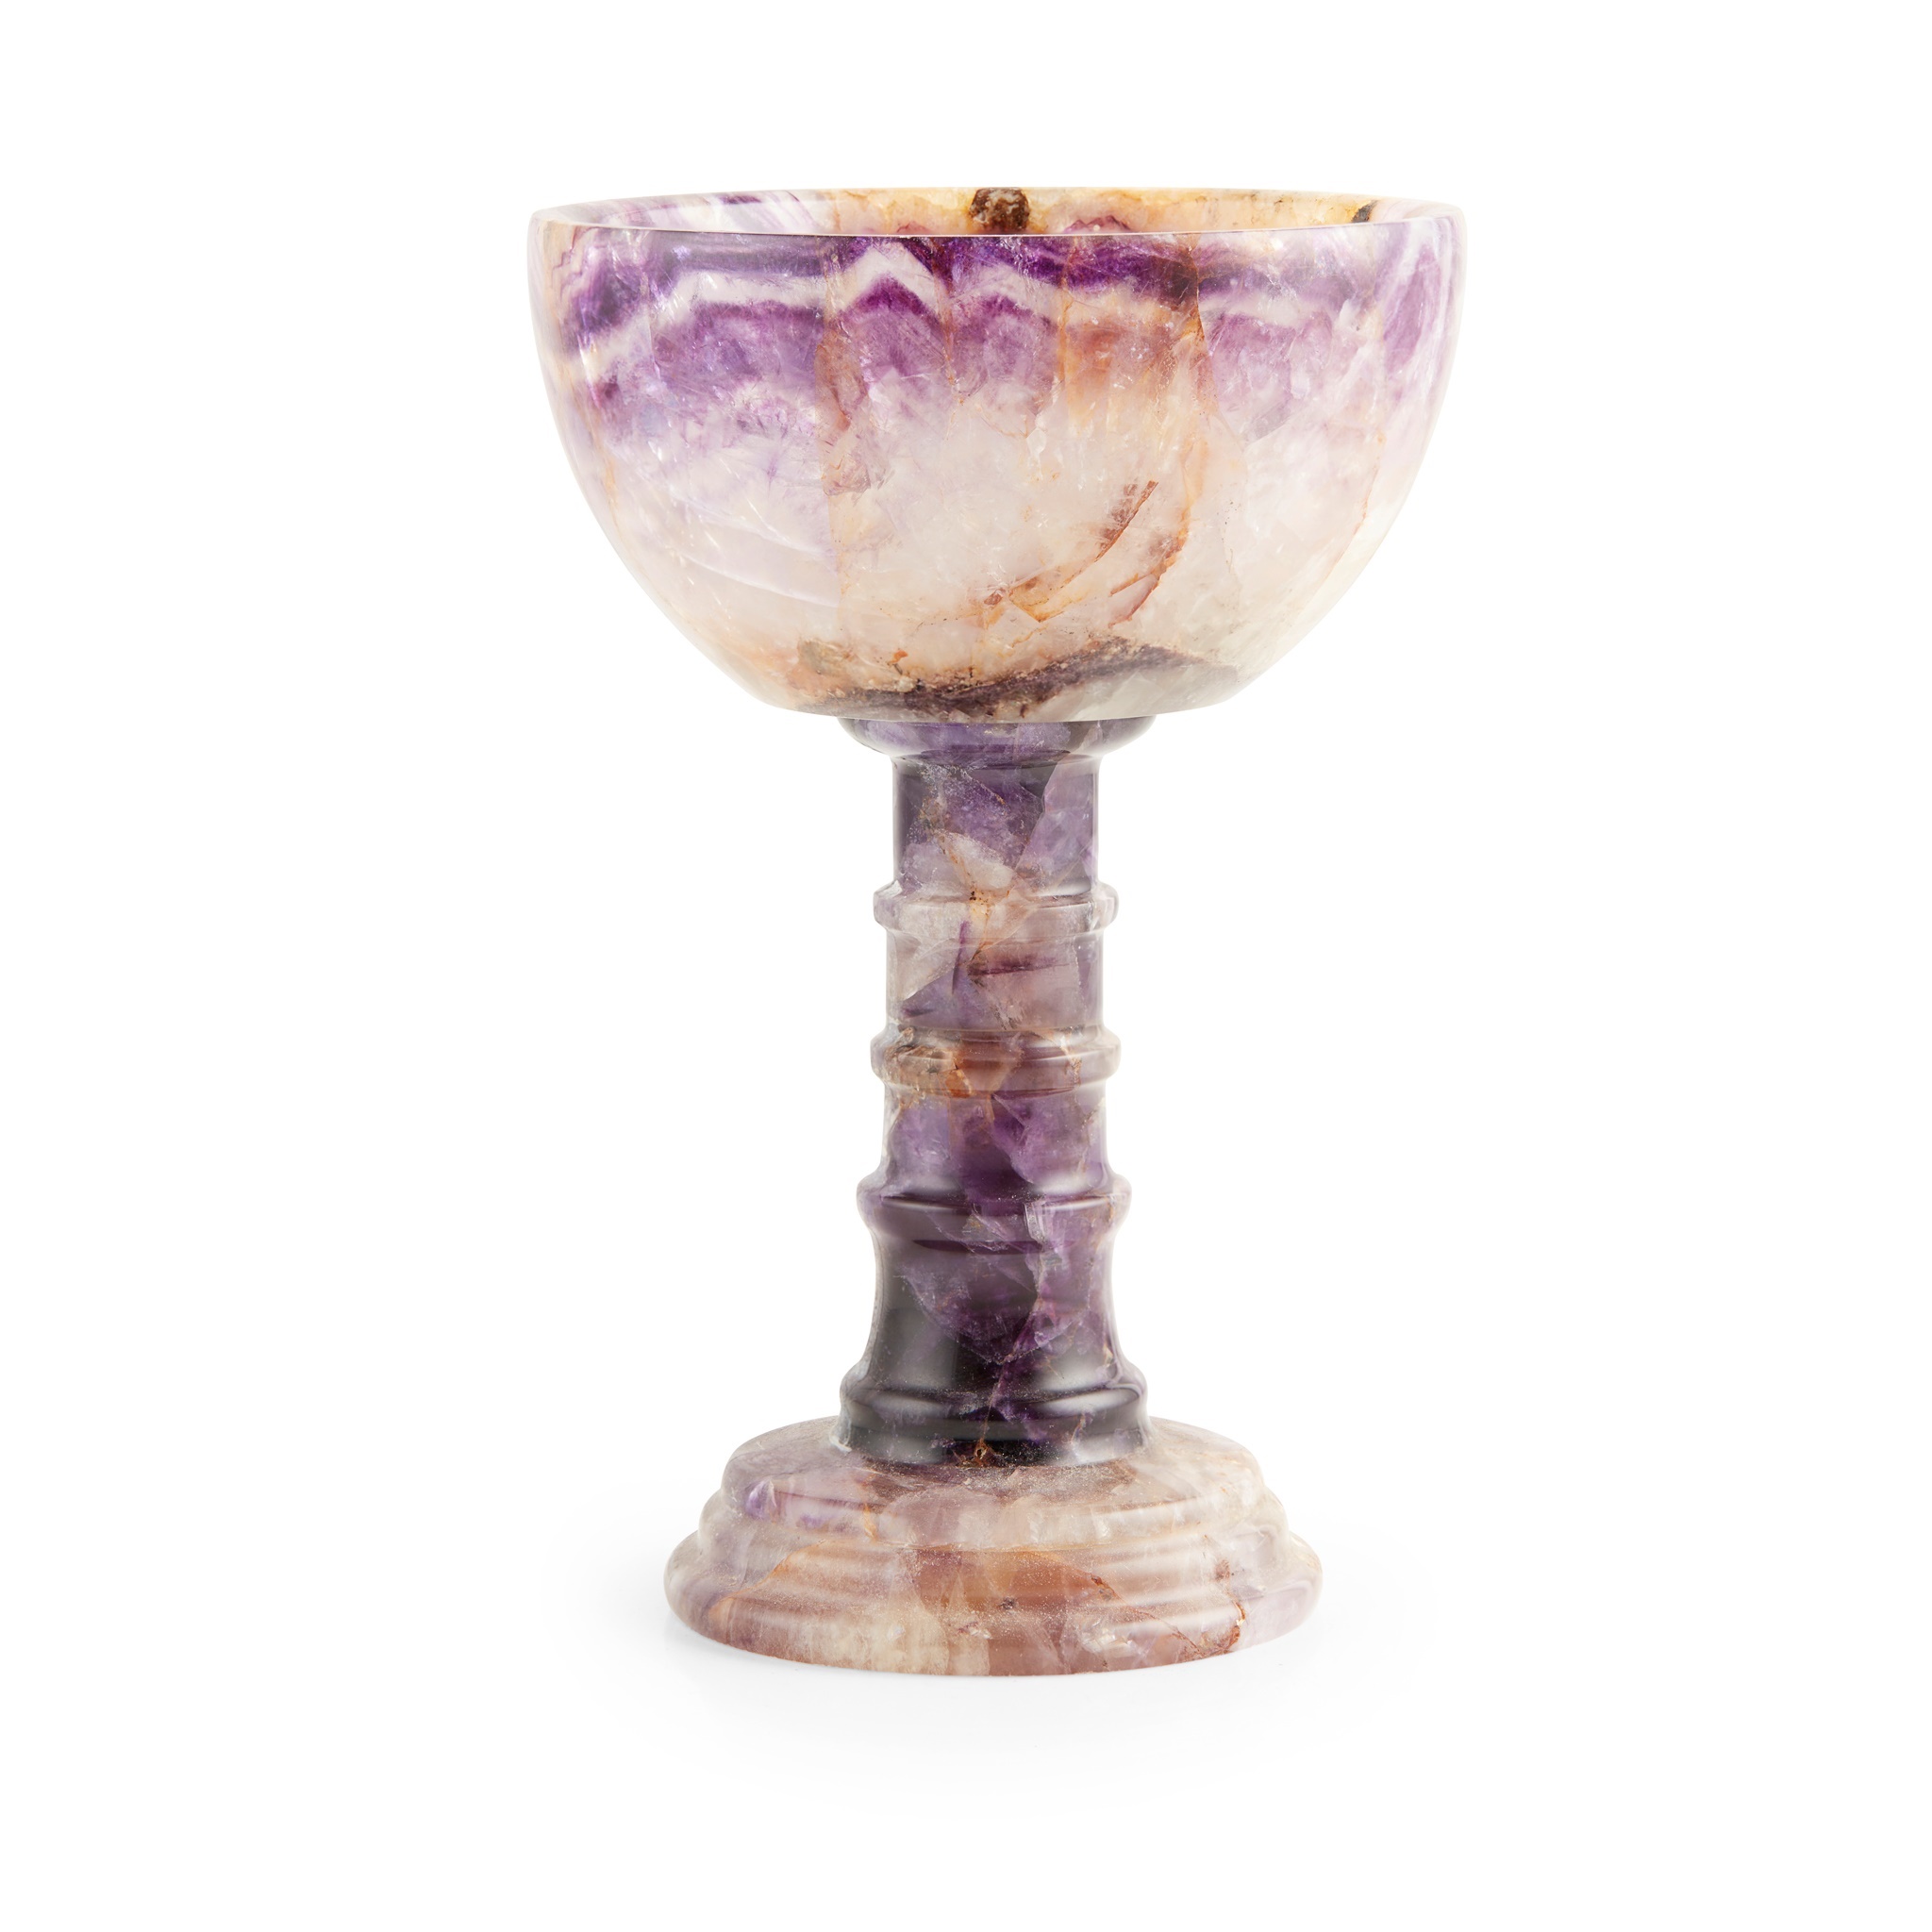 LOT 222 | BLUE JOHN GOBLET | LATE 19TH/ EARLY 20TH CENTURY | £700 - £1,000 + fees